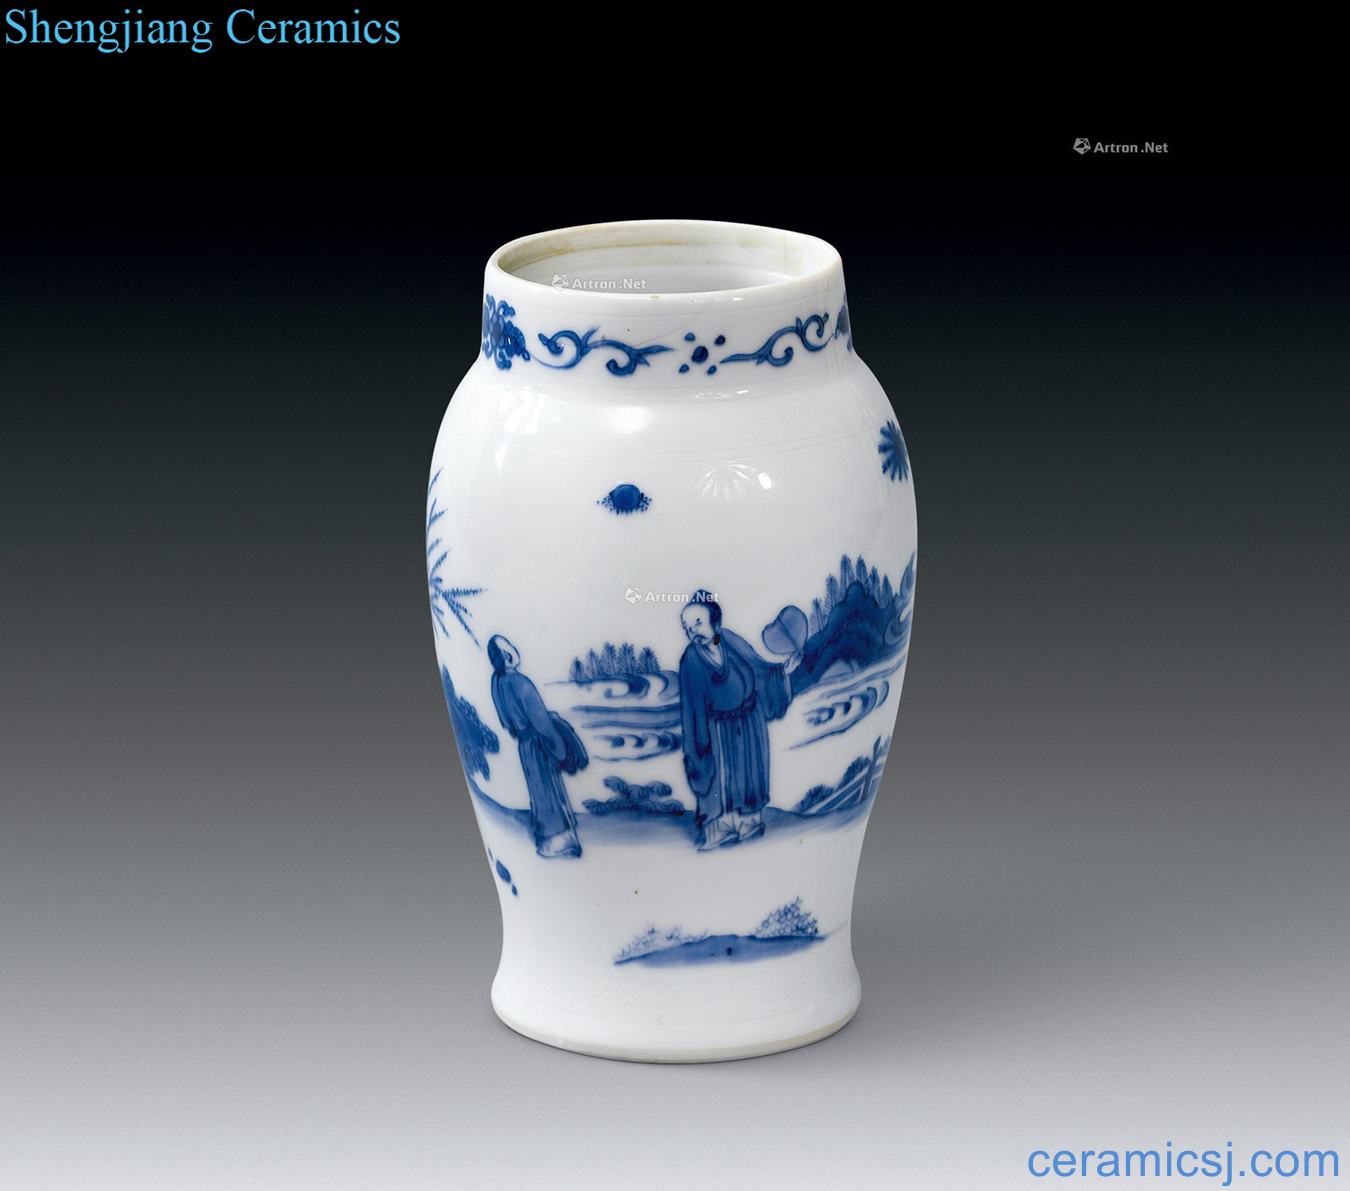 In the Ming dynasty Blue and white landscape character lines lotus seeds cans